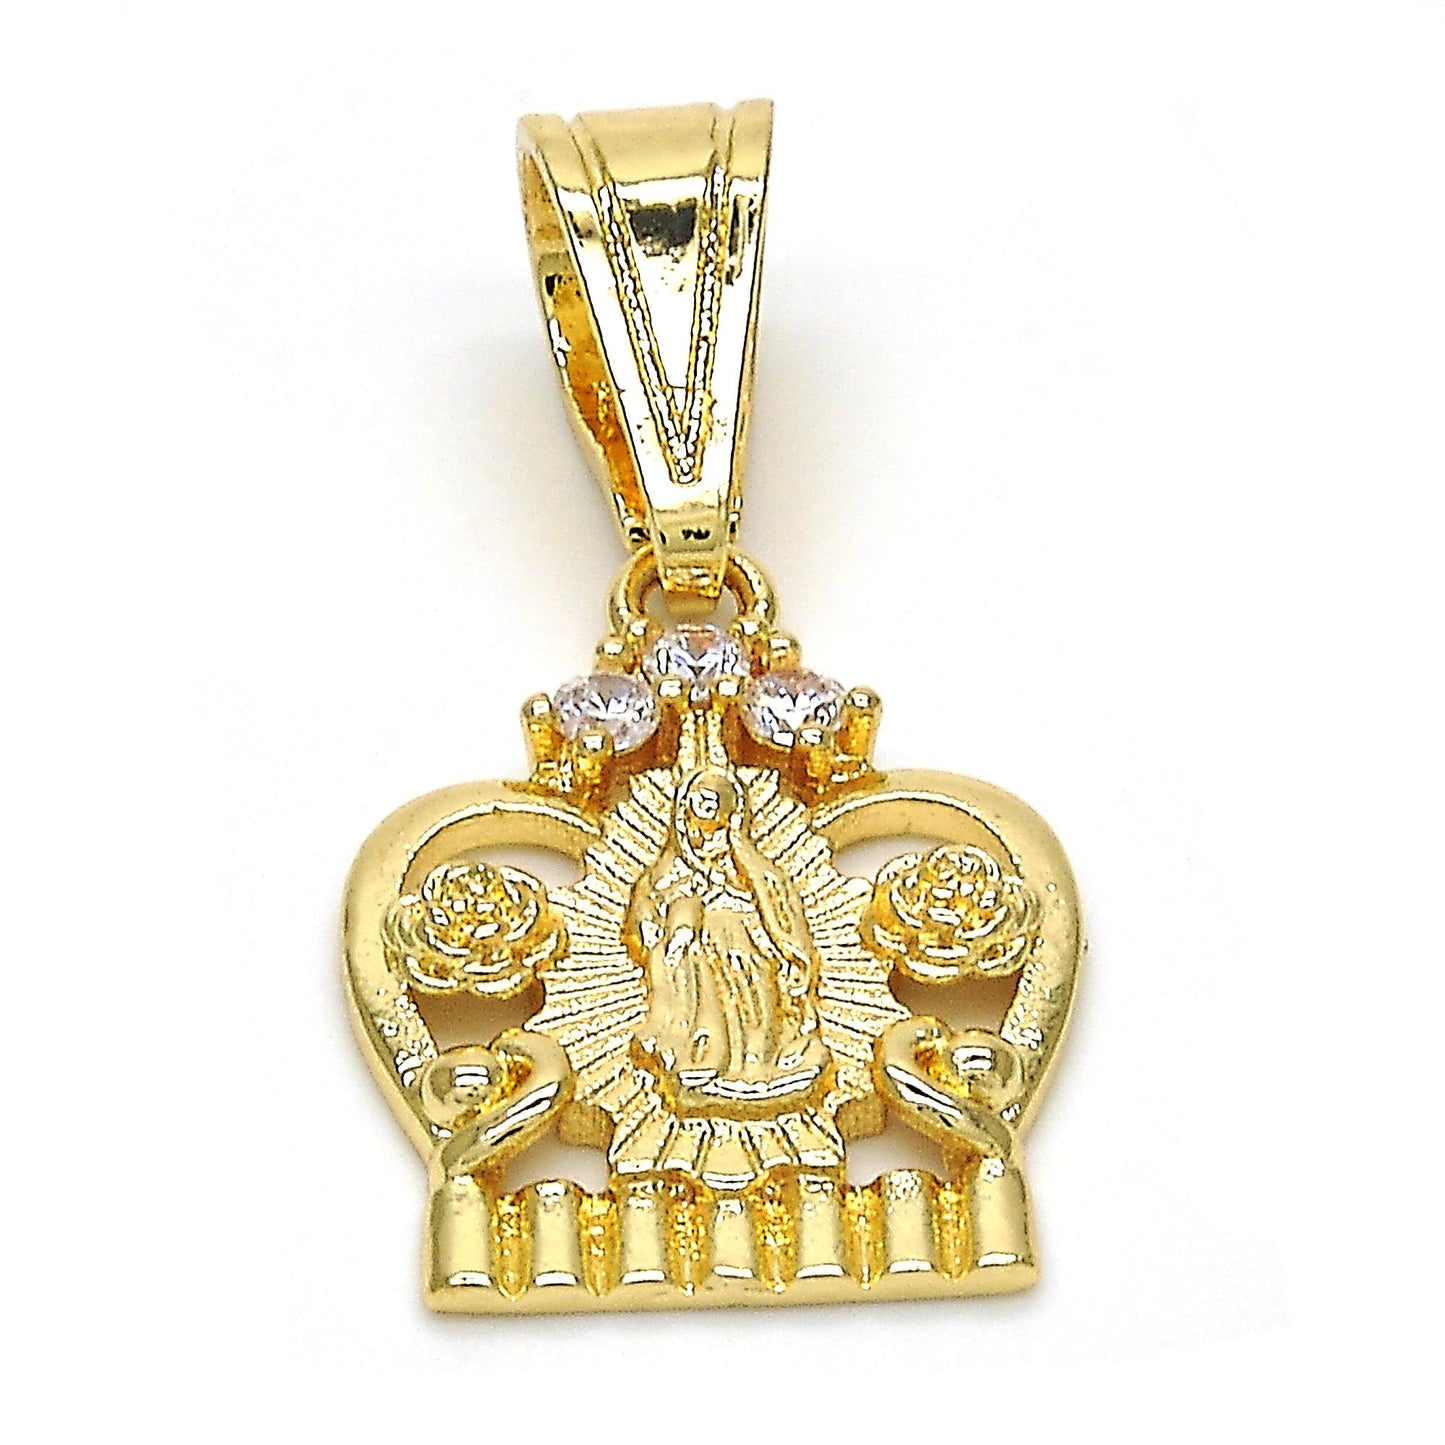 Polished 0.25 mils 14k Yellow Gold Plated Clear CZ Type Type Type Pendant, 35mm x 17mm (⅓ inches' x ⅔ inches') (SKU: GL-PD1027)